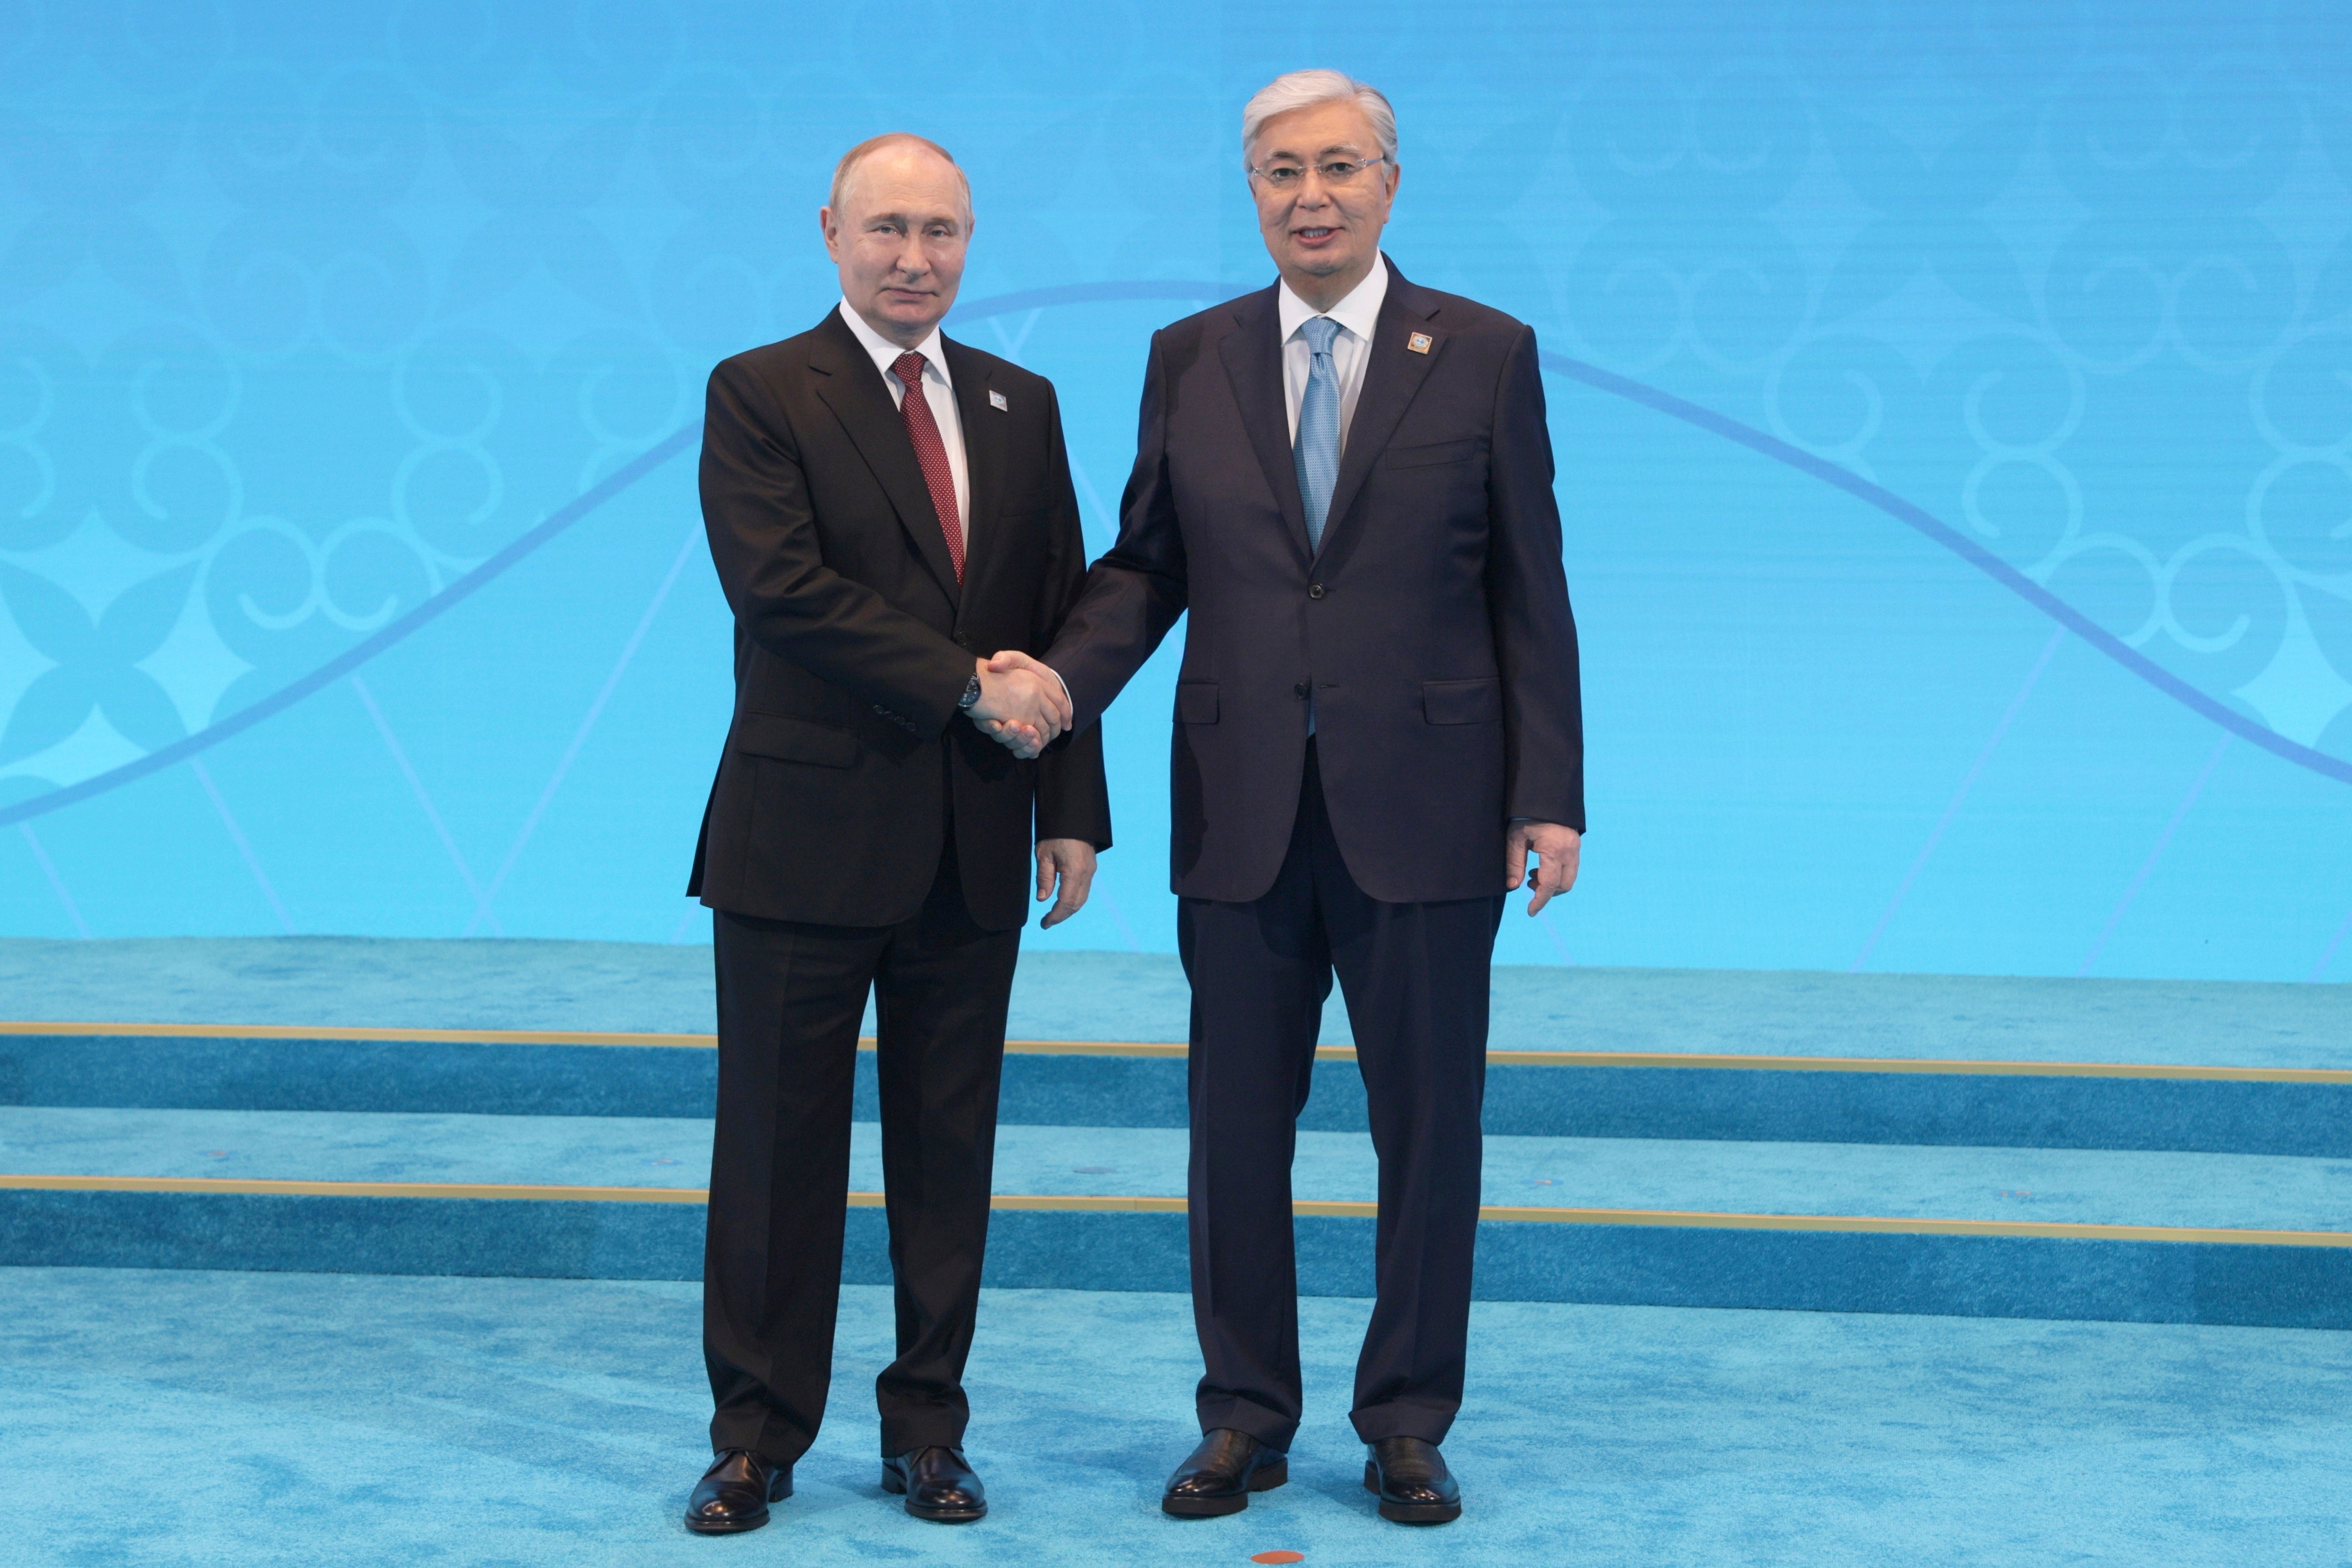 Kazakh President Kassym-Jomart Tokayev, right, and Russian President Vladimir Putin pose for a photo at the Shanghai Cooperation Organization states leaders’ summit in